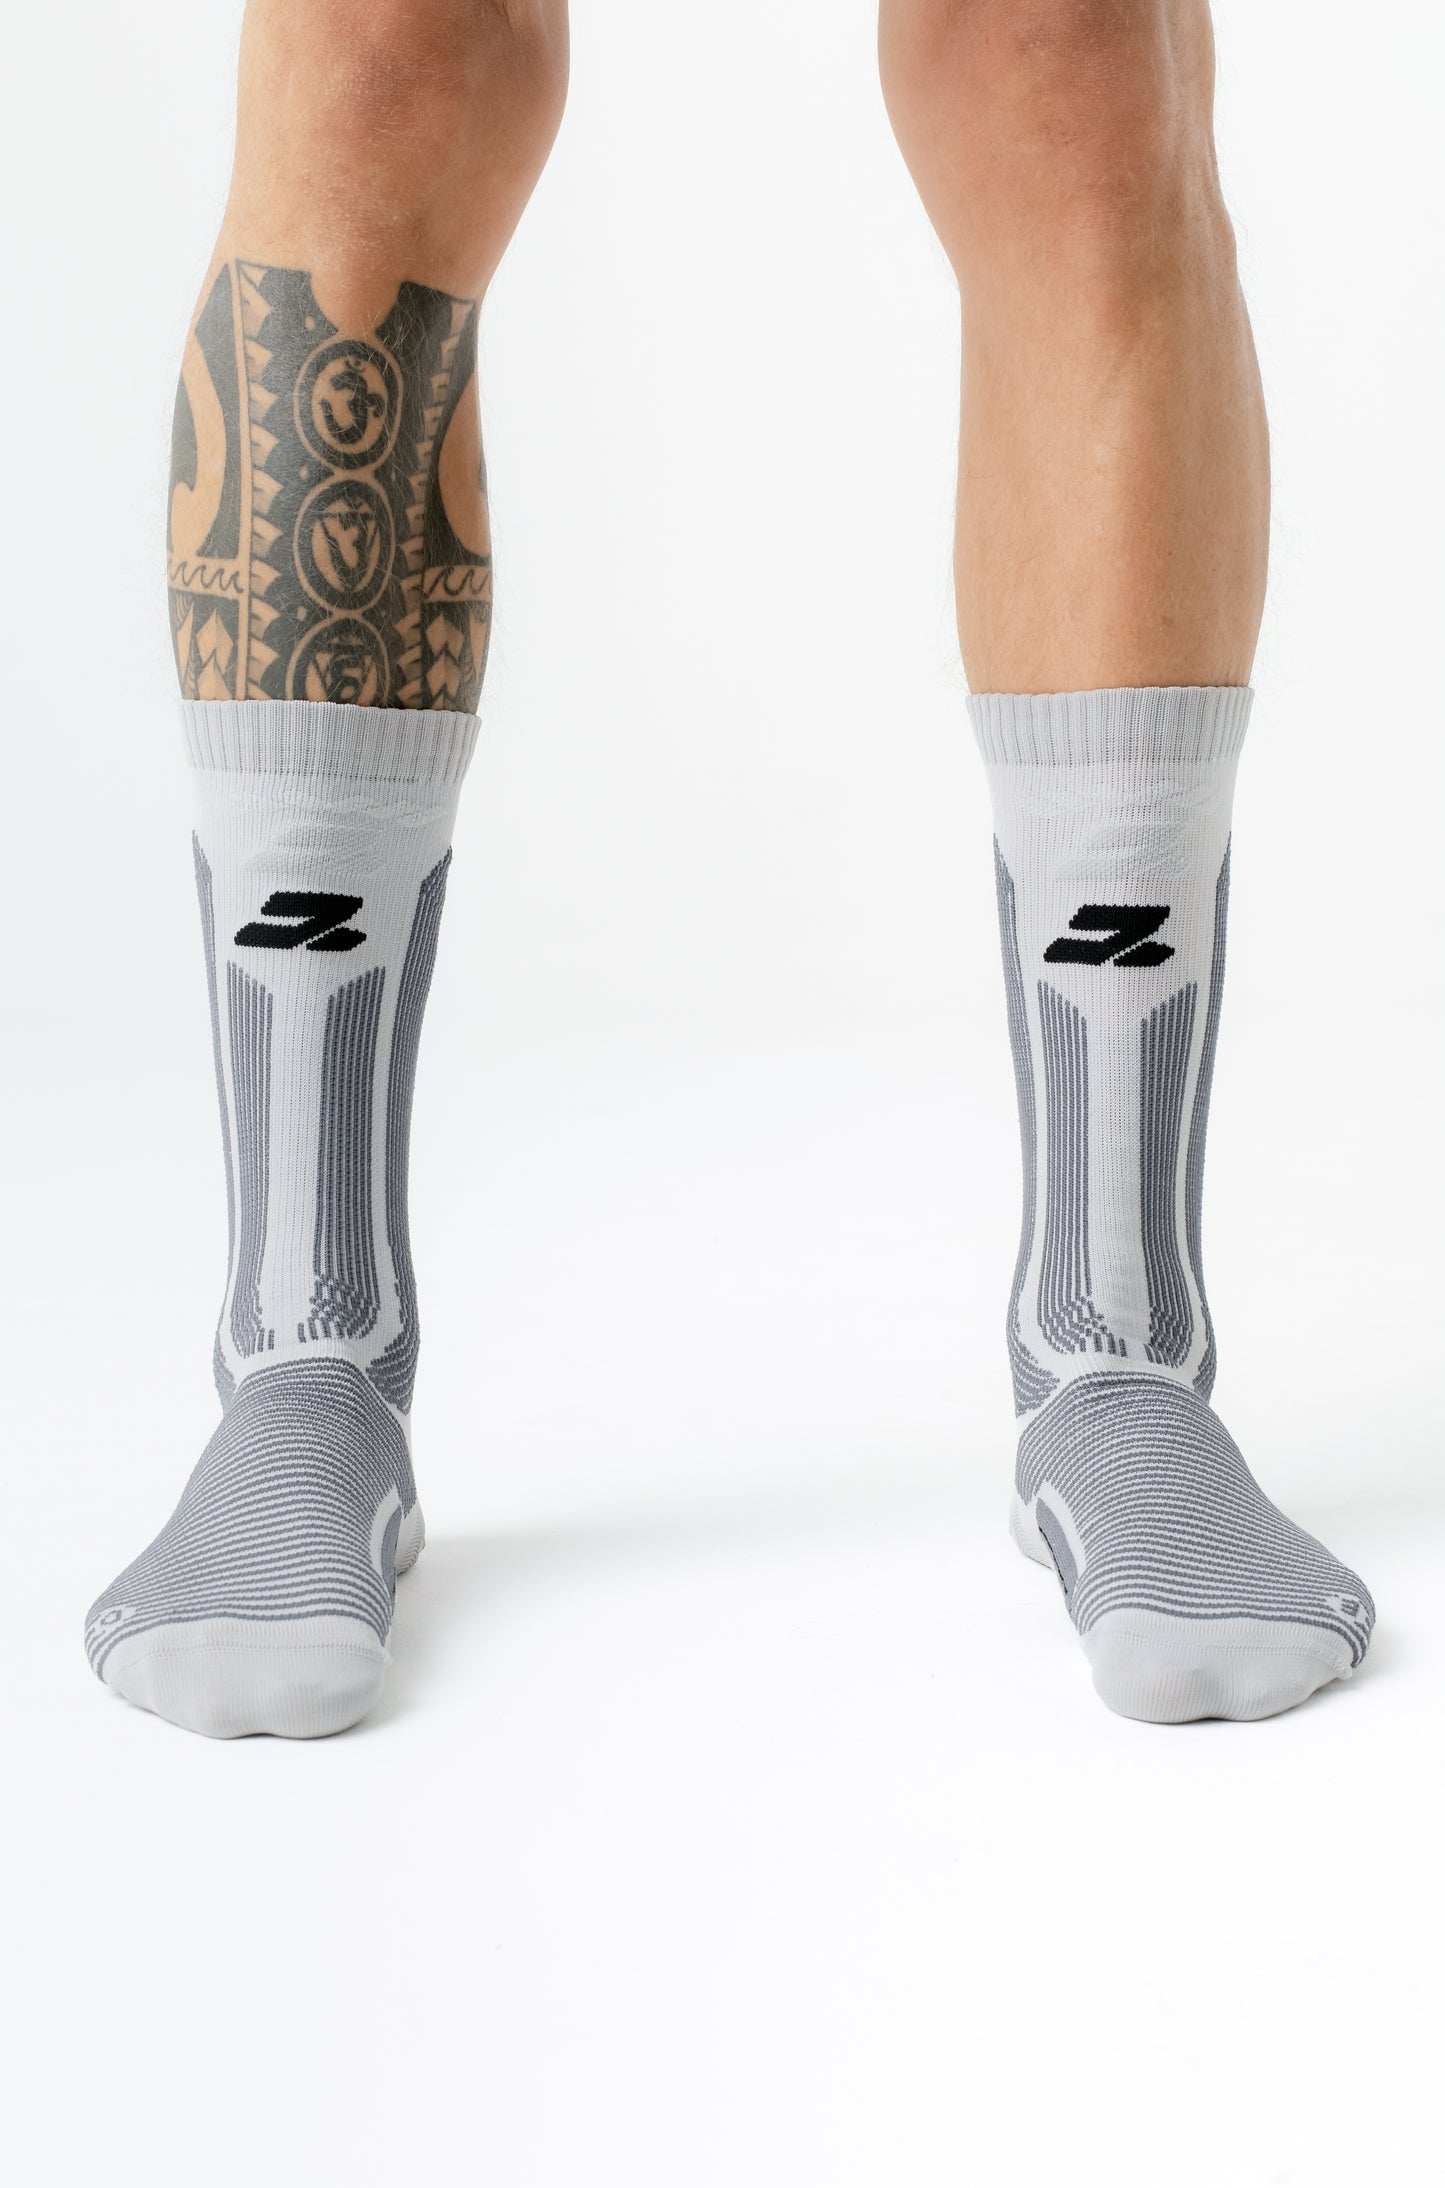 PACE - DT2 Forms Compression Socks Mid "Aluminium" - THE GAME